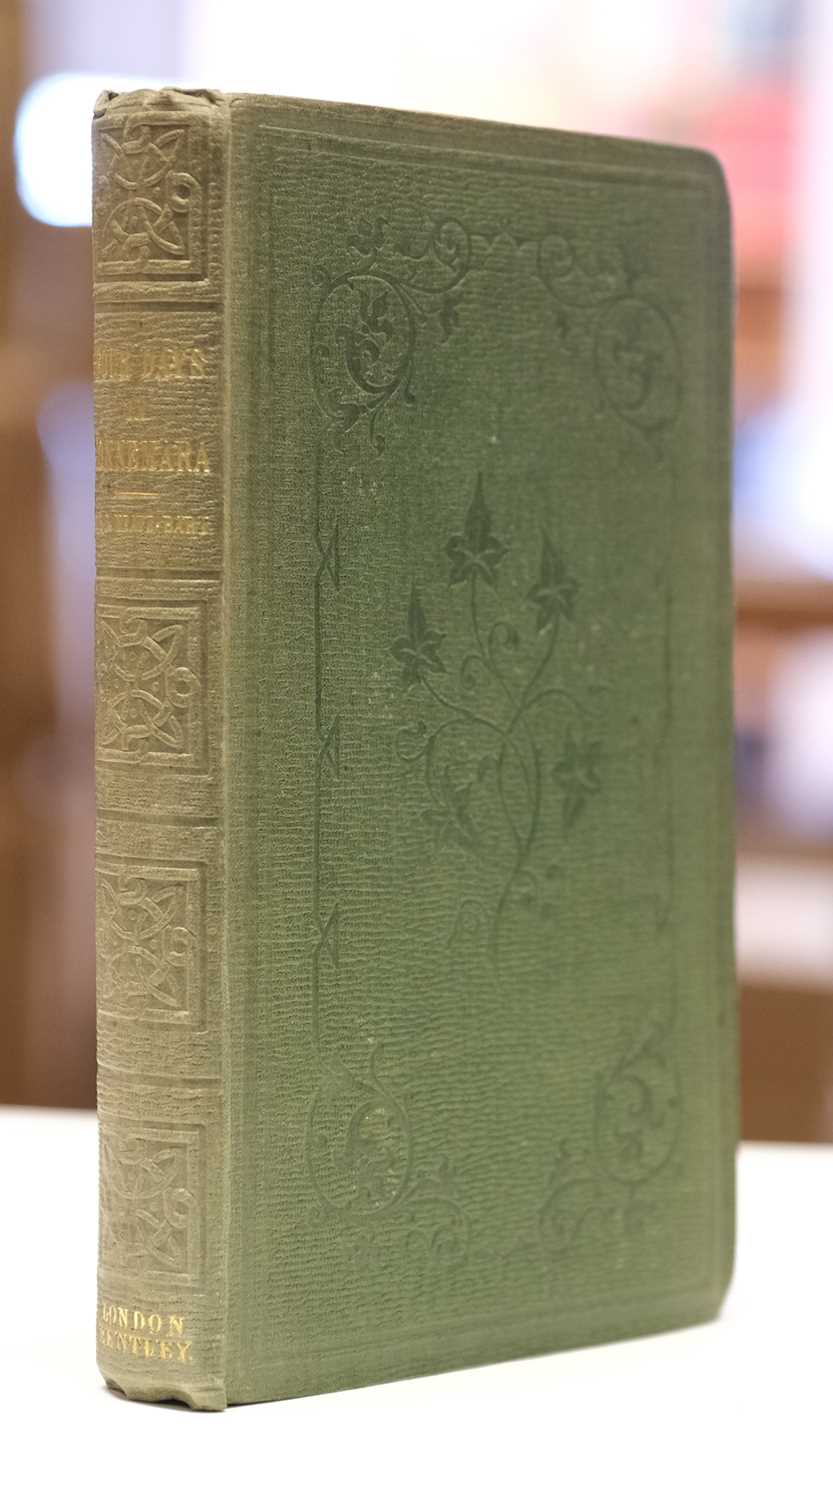 Lot 52 - Neave (Sir Digby). Four Days in Connemara, 1st edition, 1852